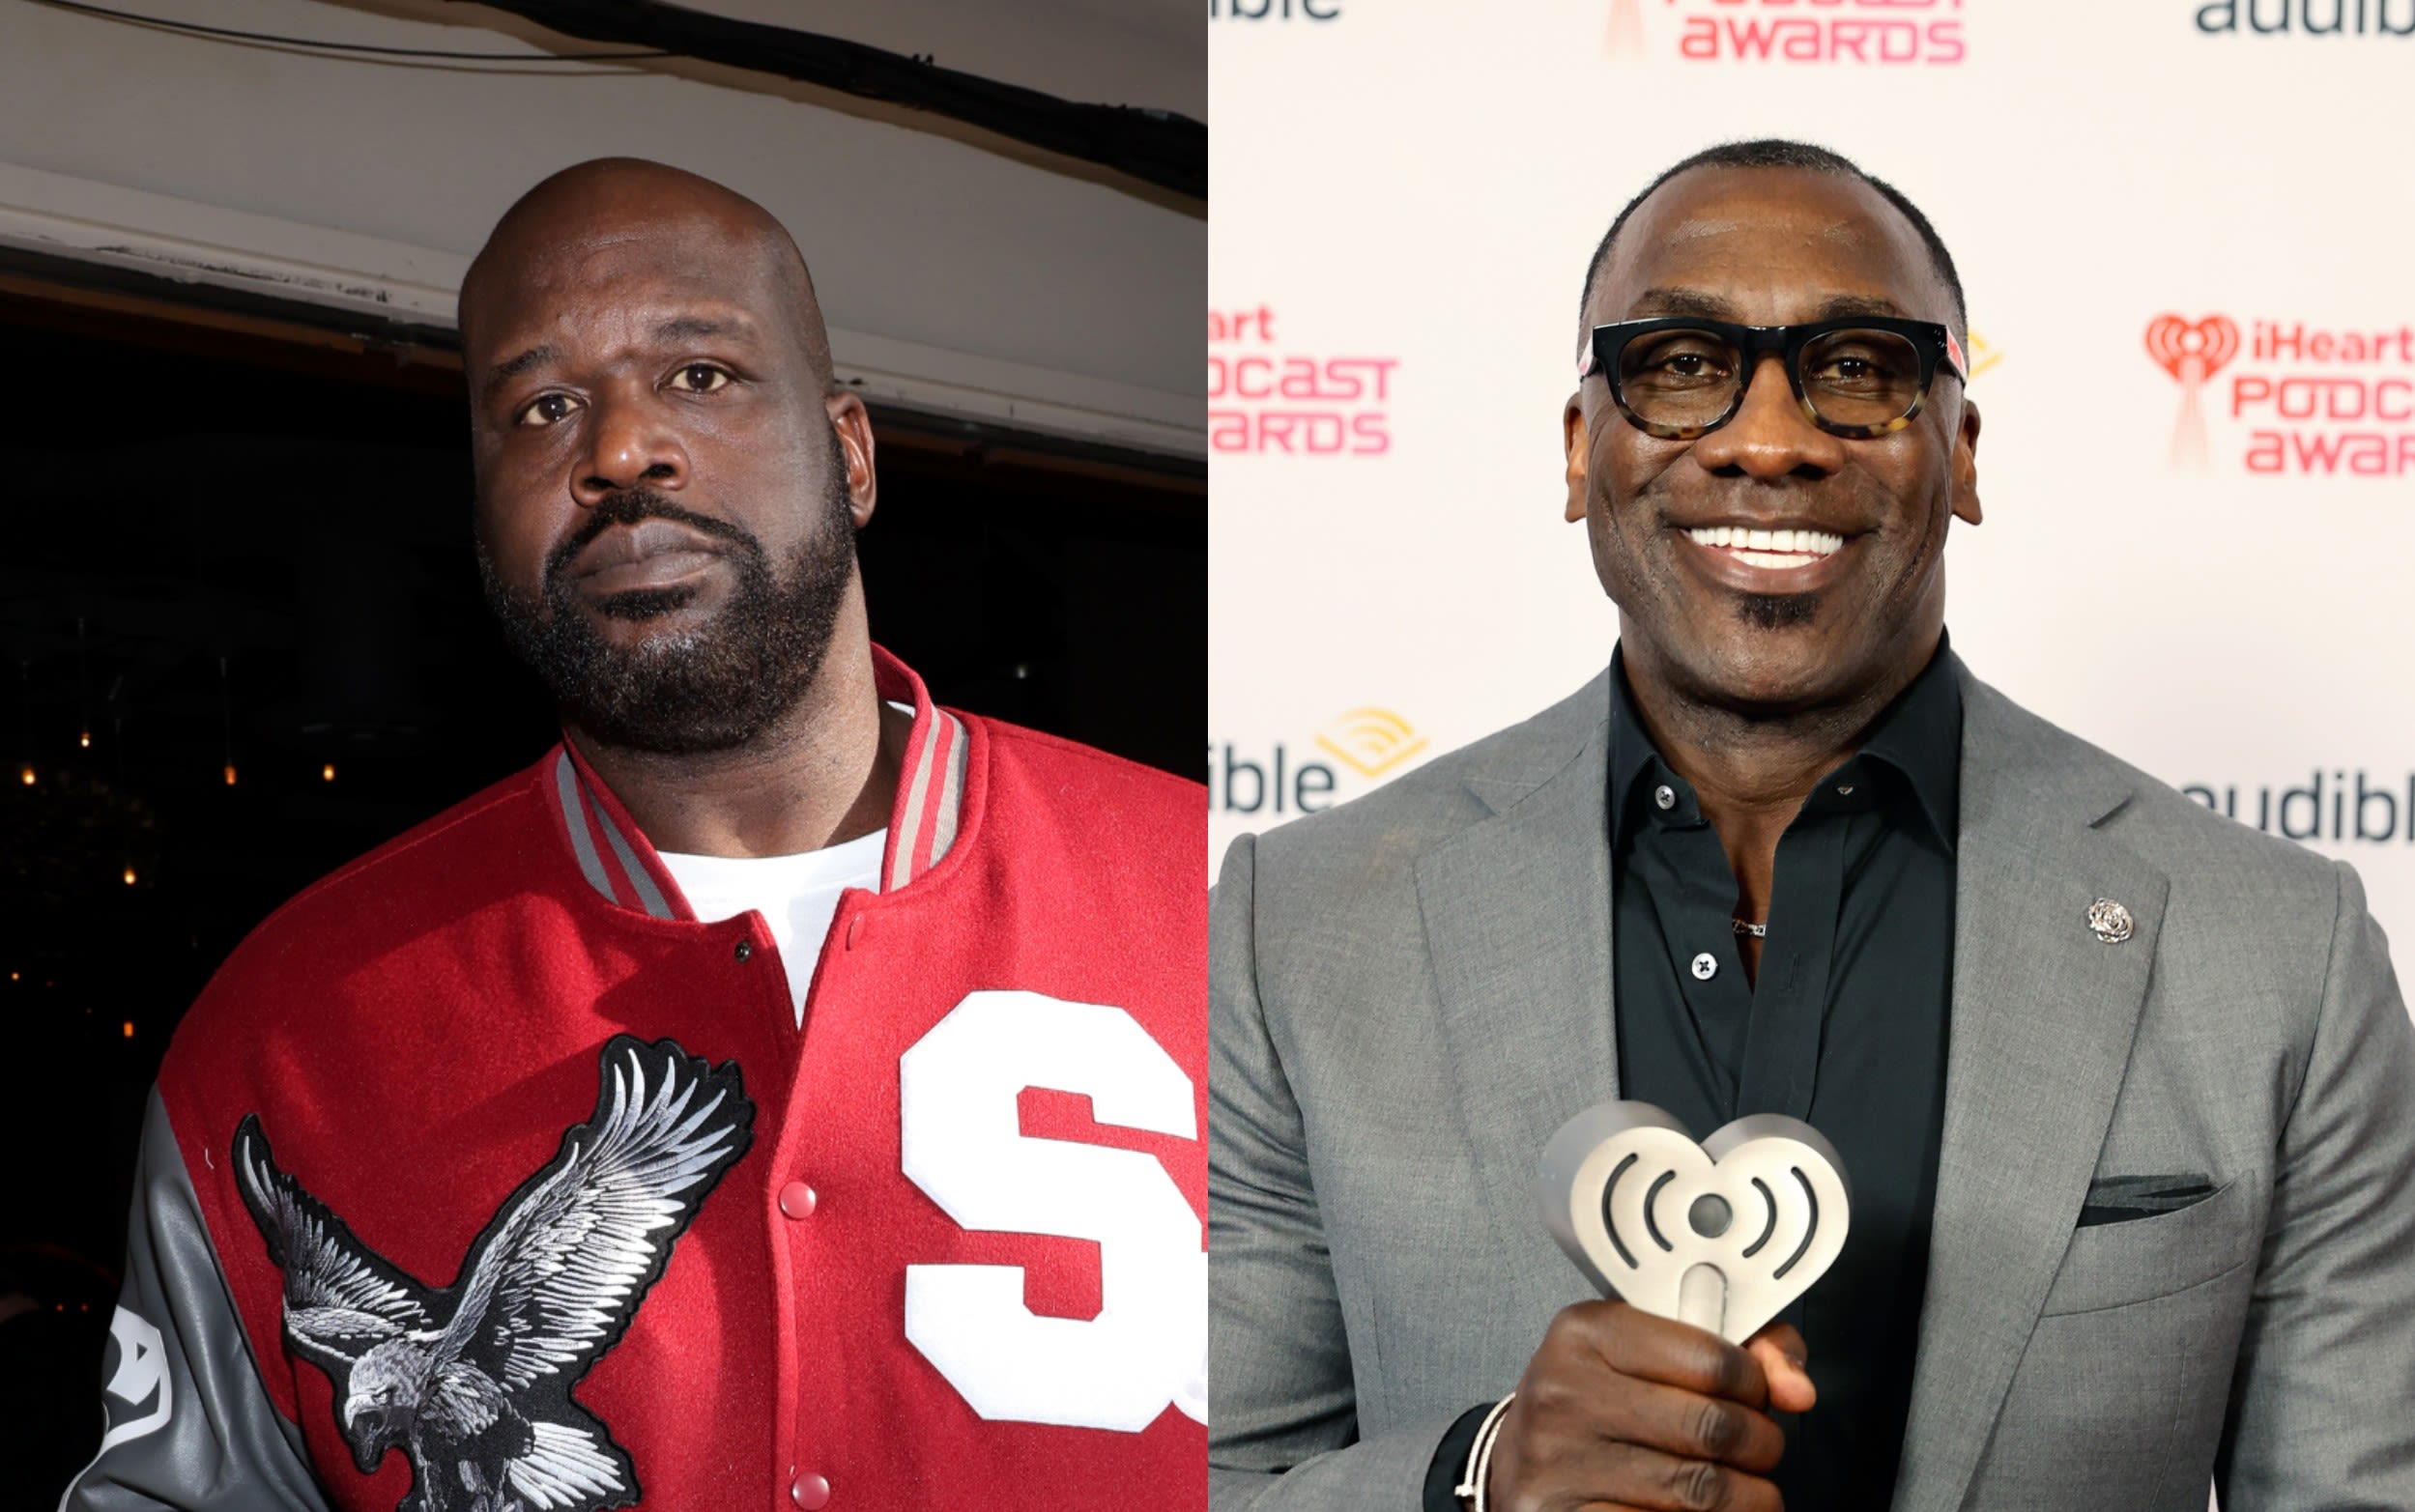 Unc vs. Unc: Shaquille O'Neal Drops Diss Track For Shannon Sharpe